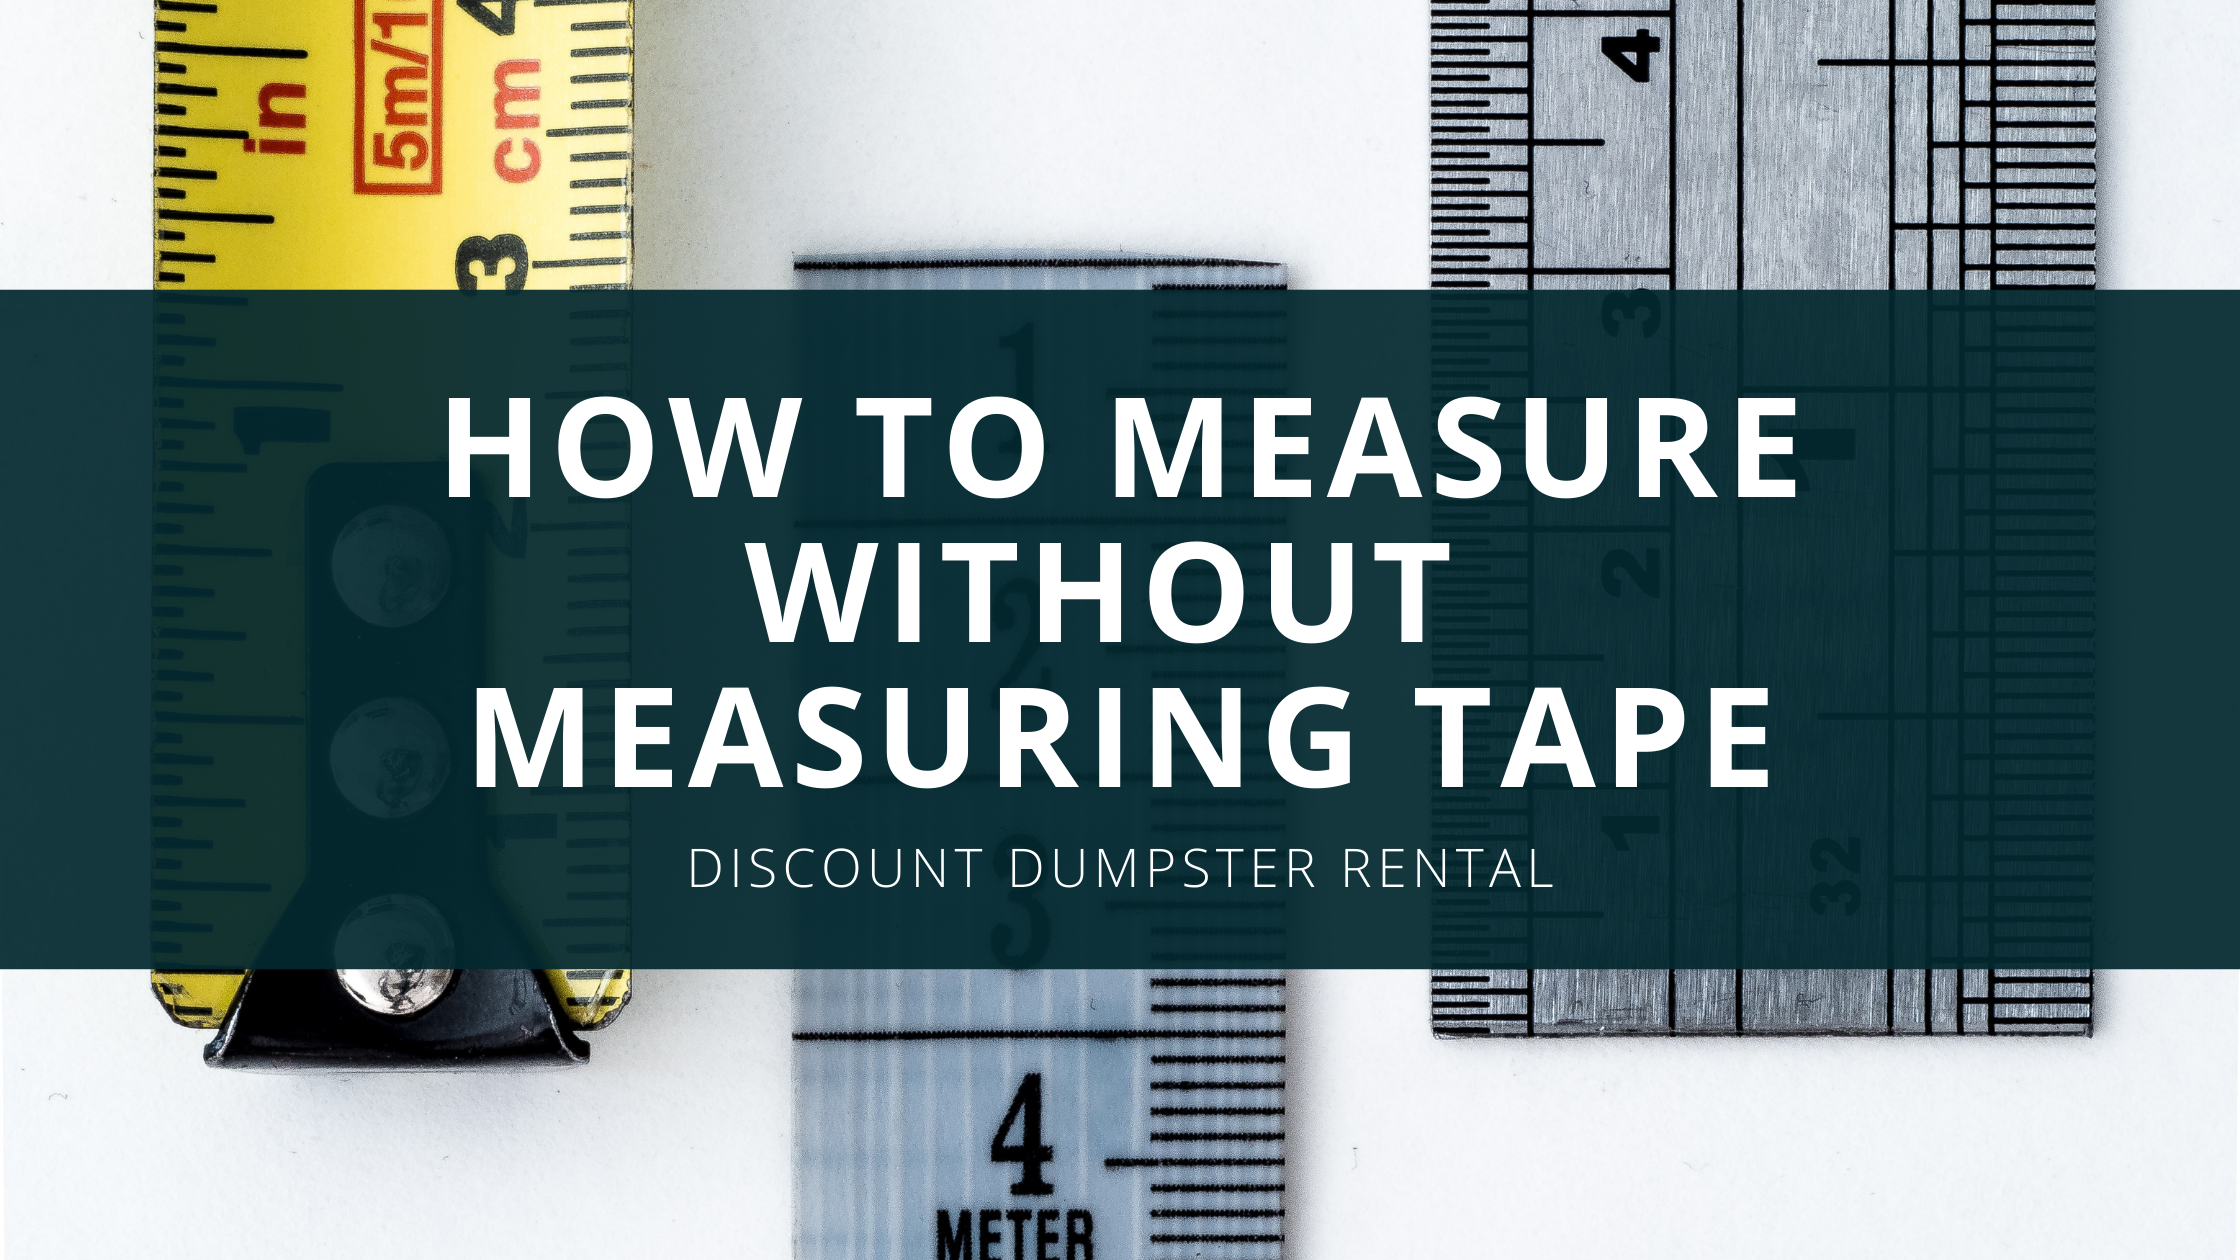 https://discountdumpsterco.com/wp-content/uploads/how-to-measure-without-measuring-tape-banner.png